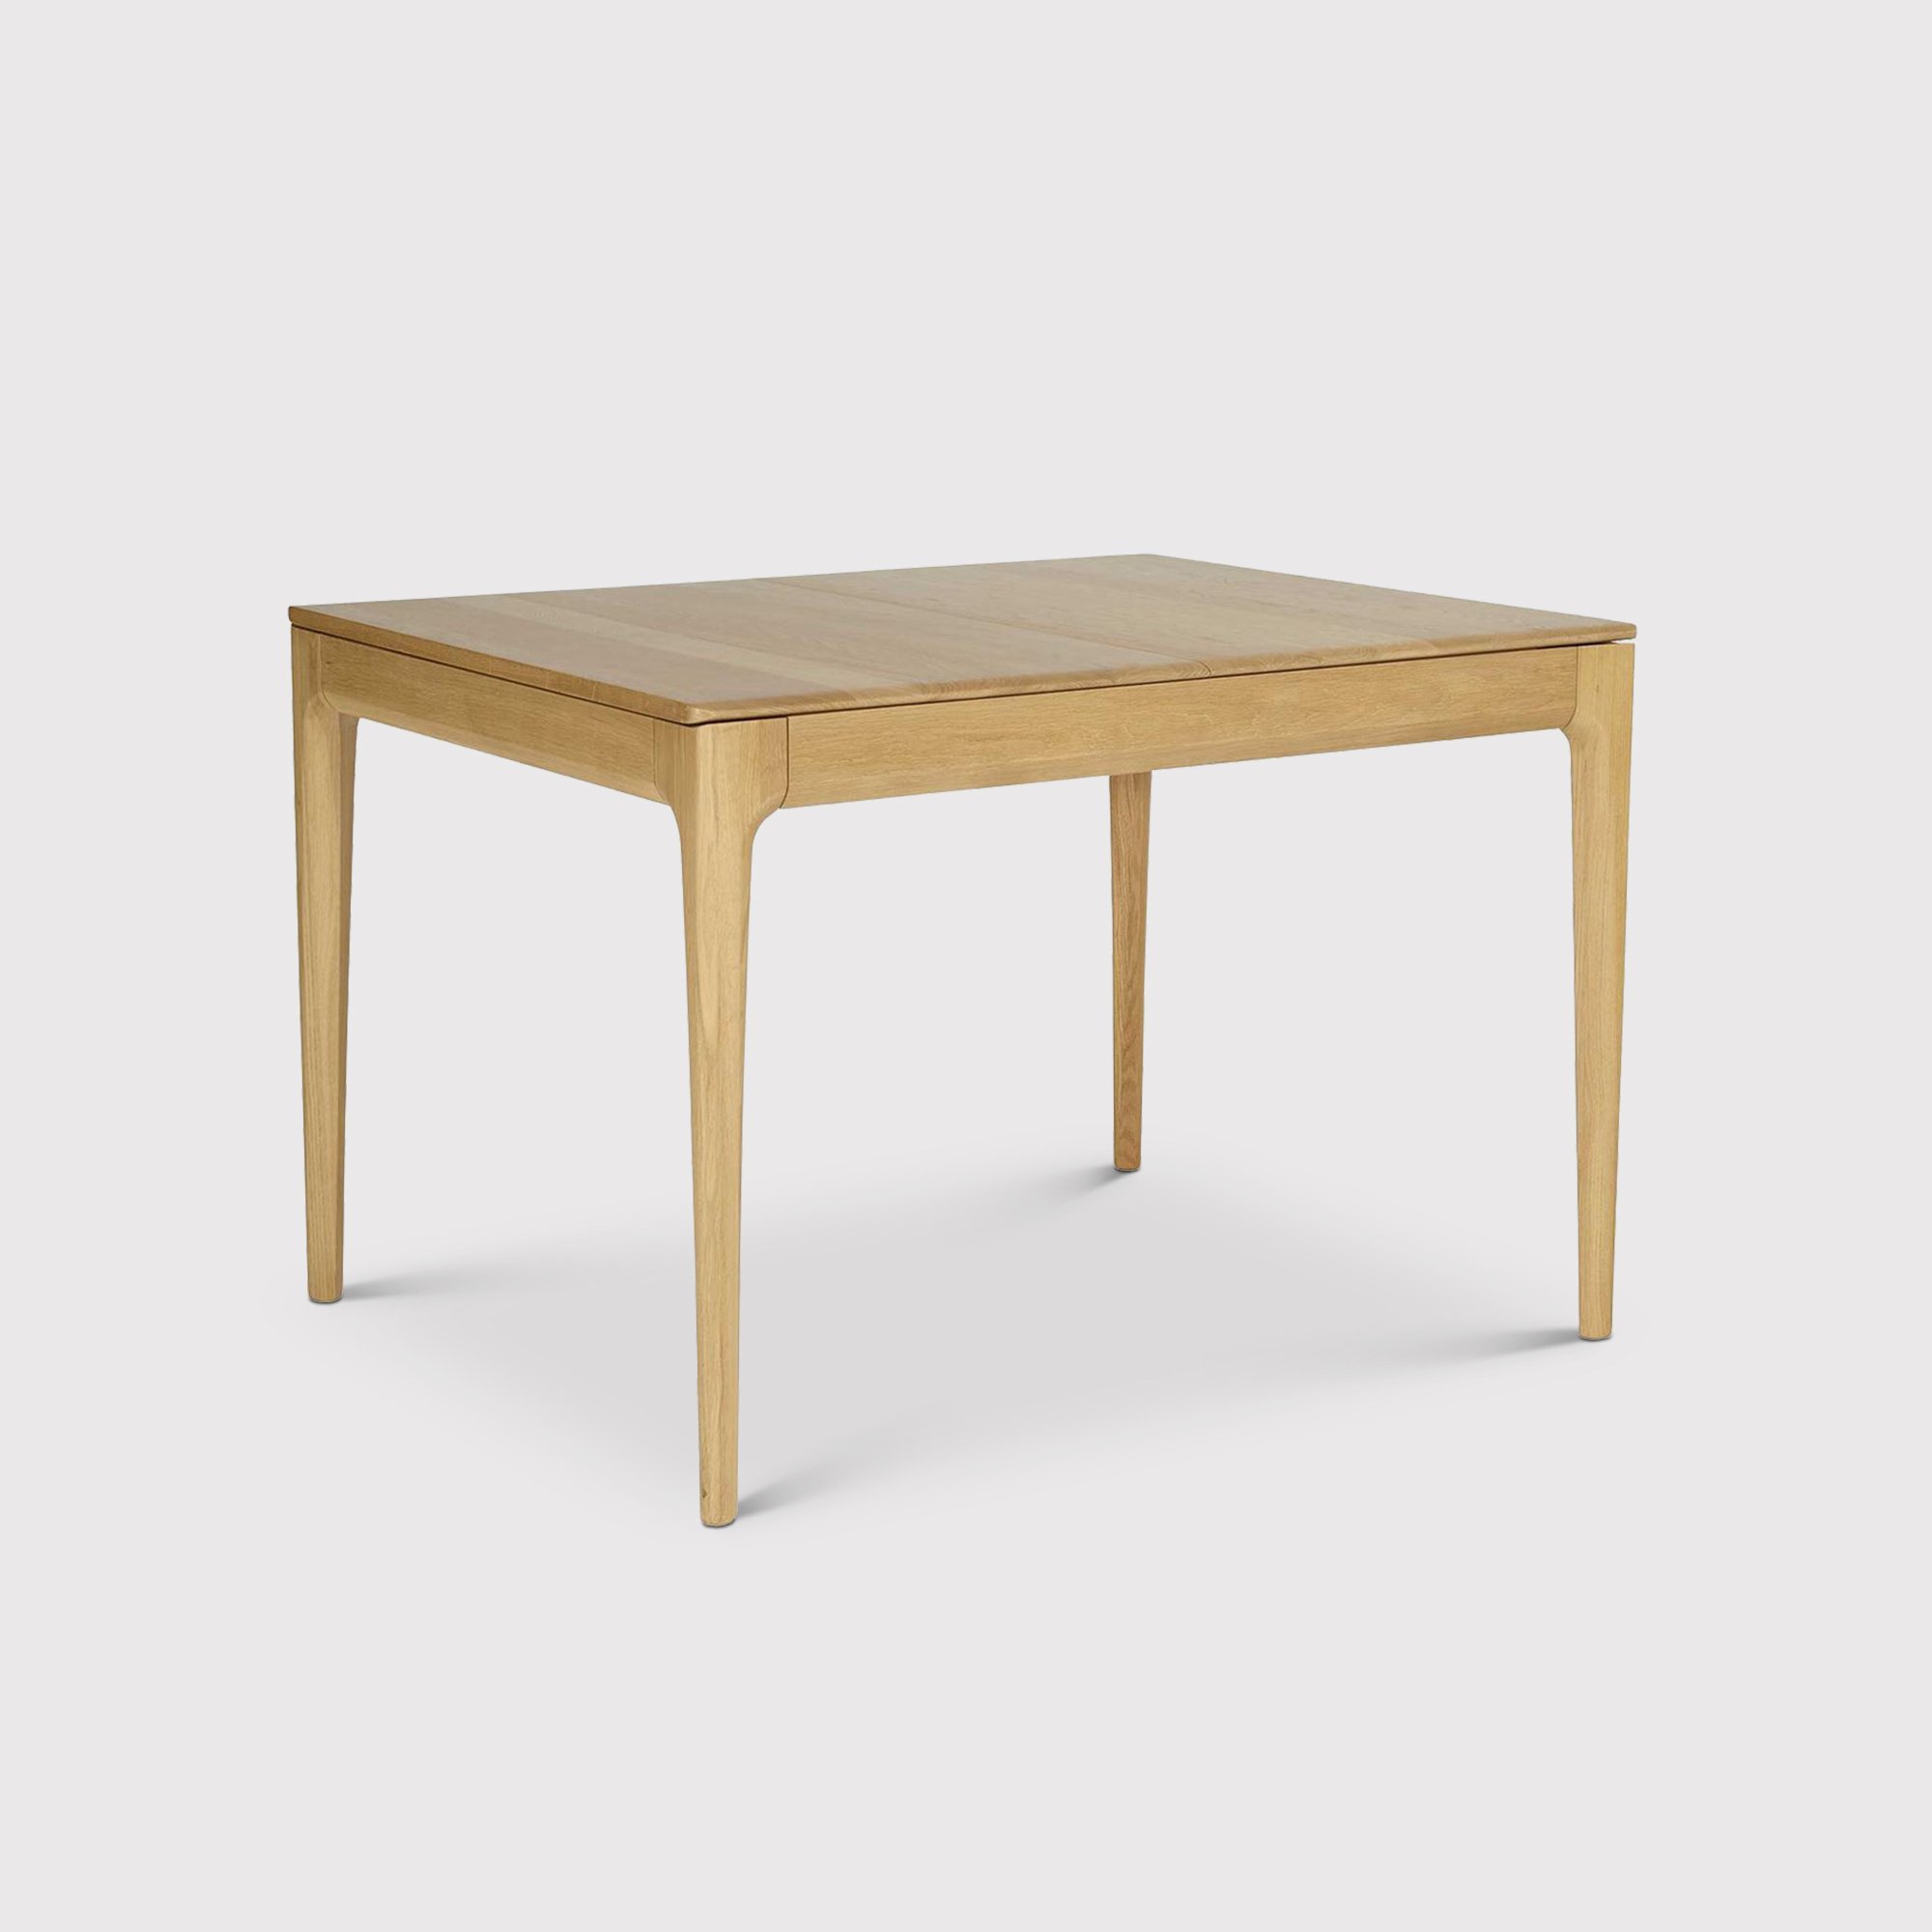 Ercol Romana Small Extending Dining Table, Neutral | Barker & Stonehouse